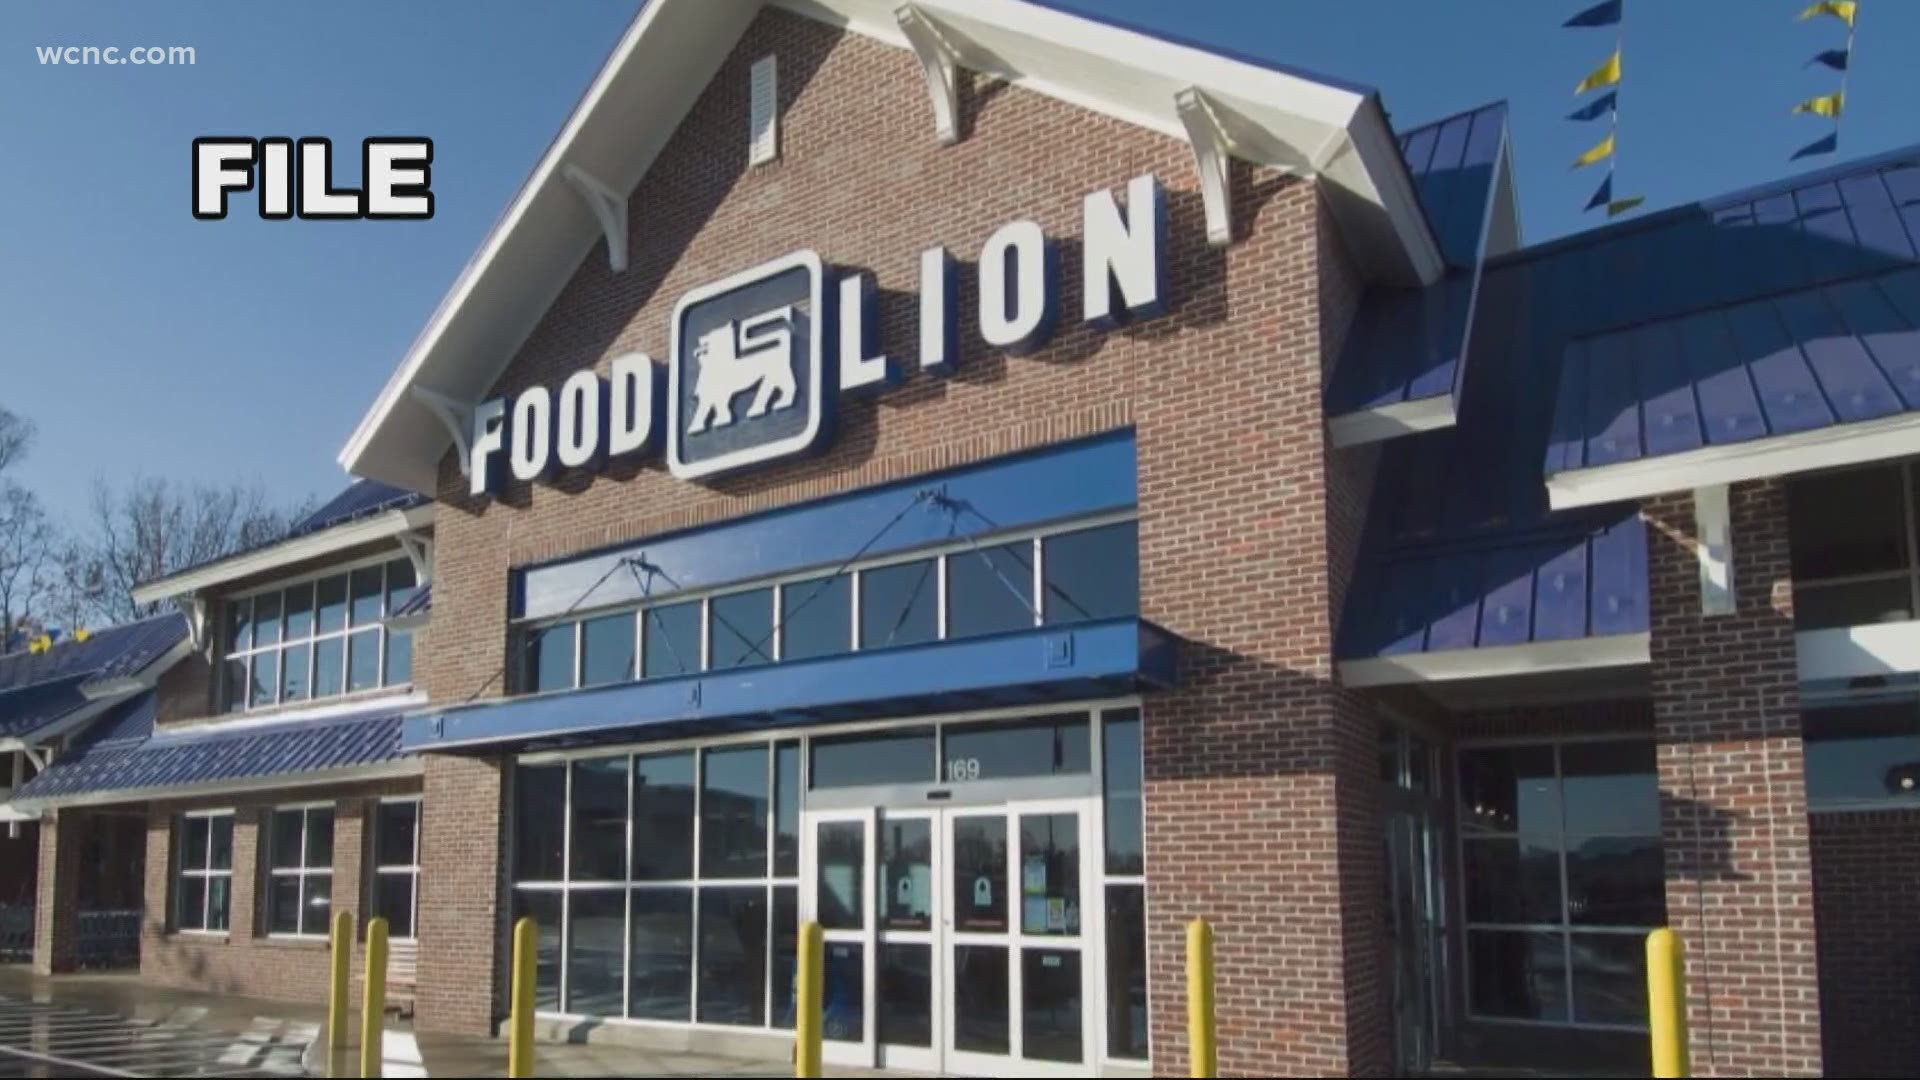 Food Lion partnered with the NBA team to benefit Second Harvest Food Bank of Metrolina.